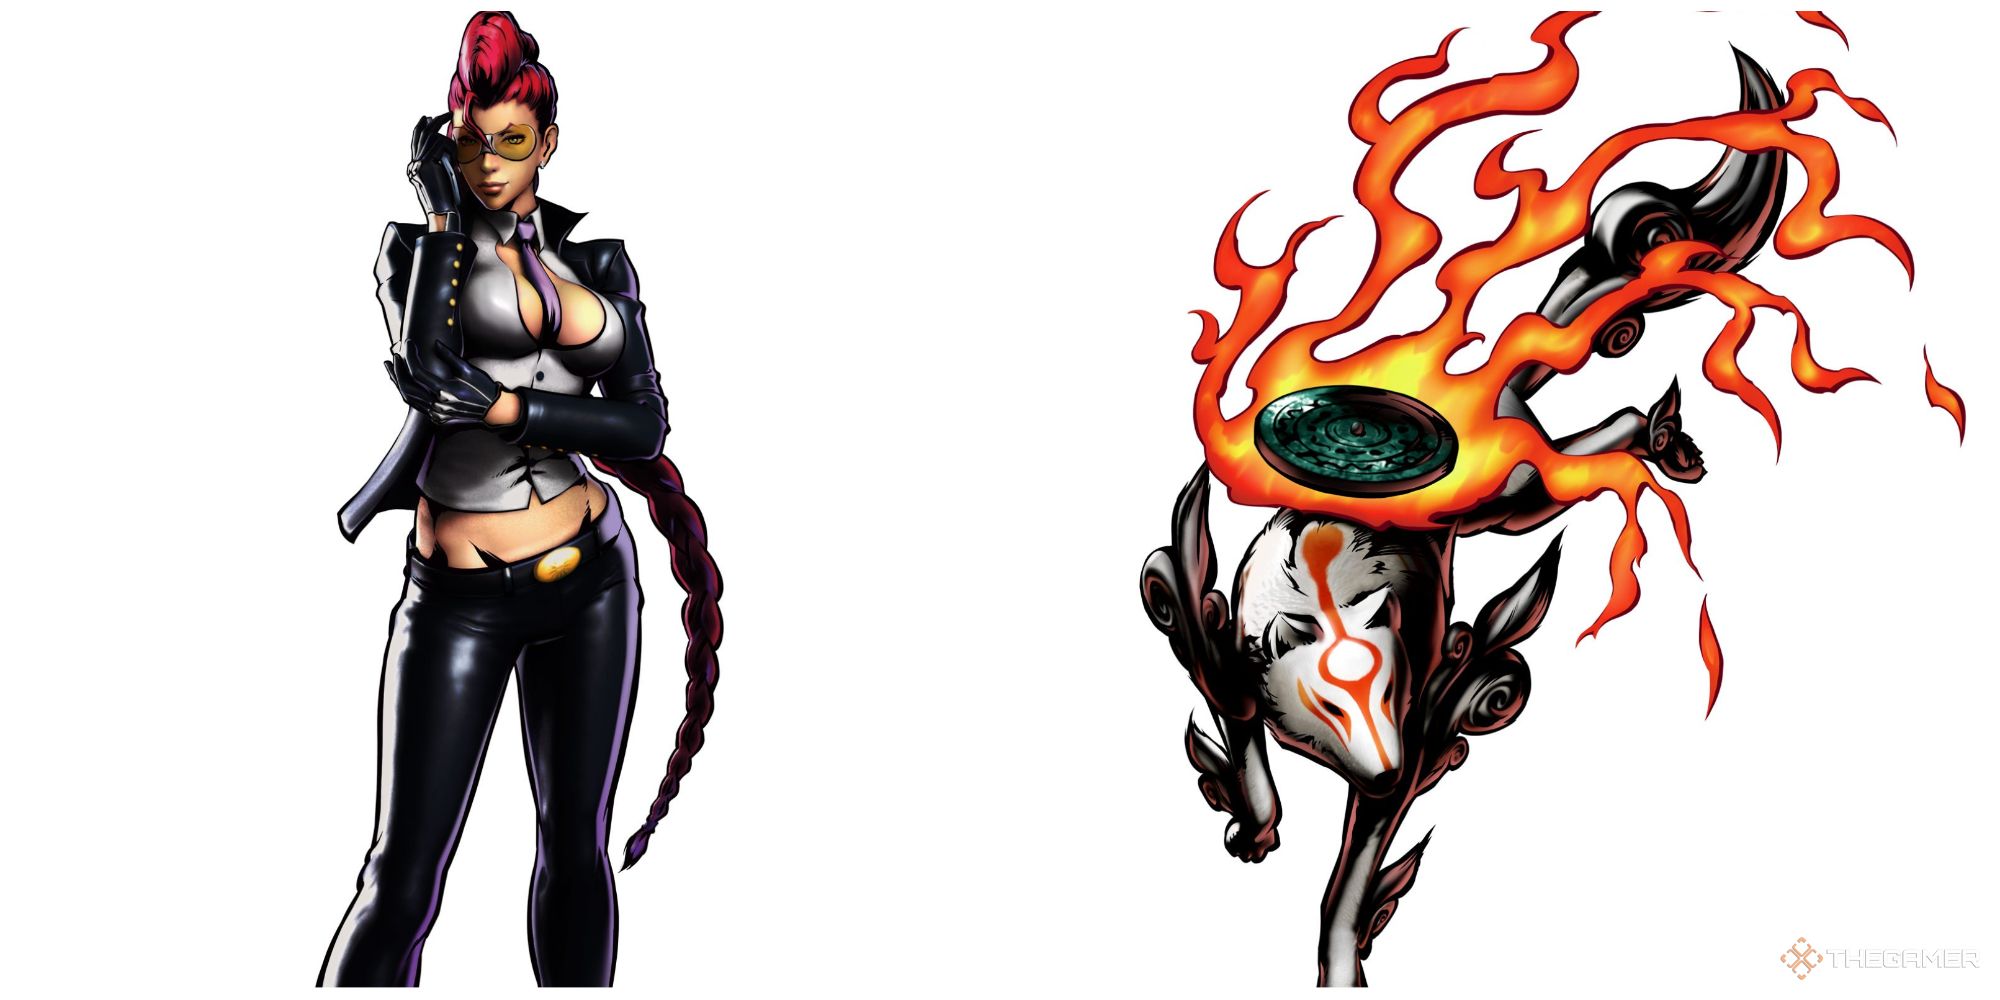 C Viper and Amaterasu In Ultimate Marvel 3